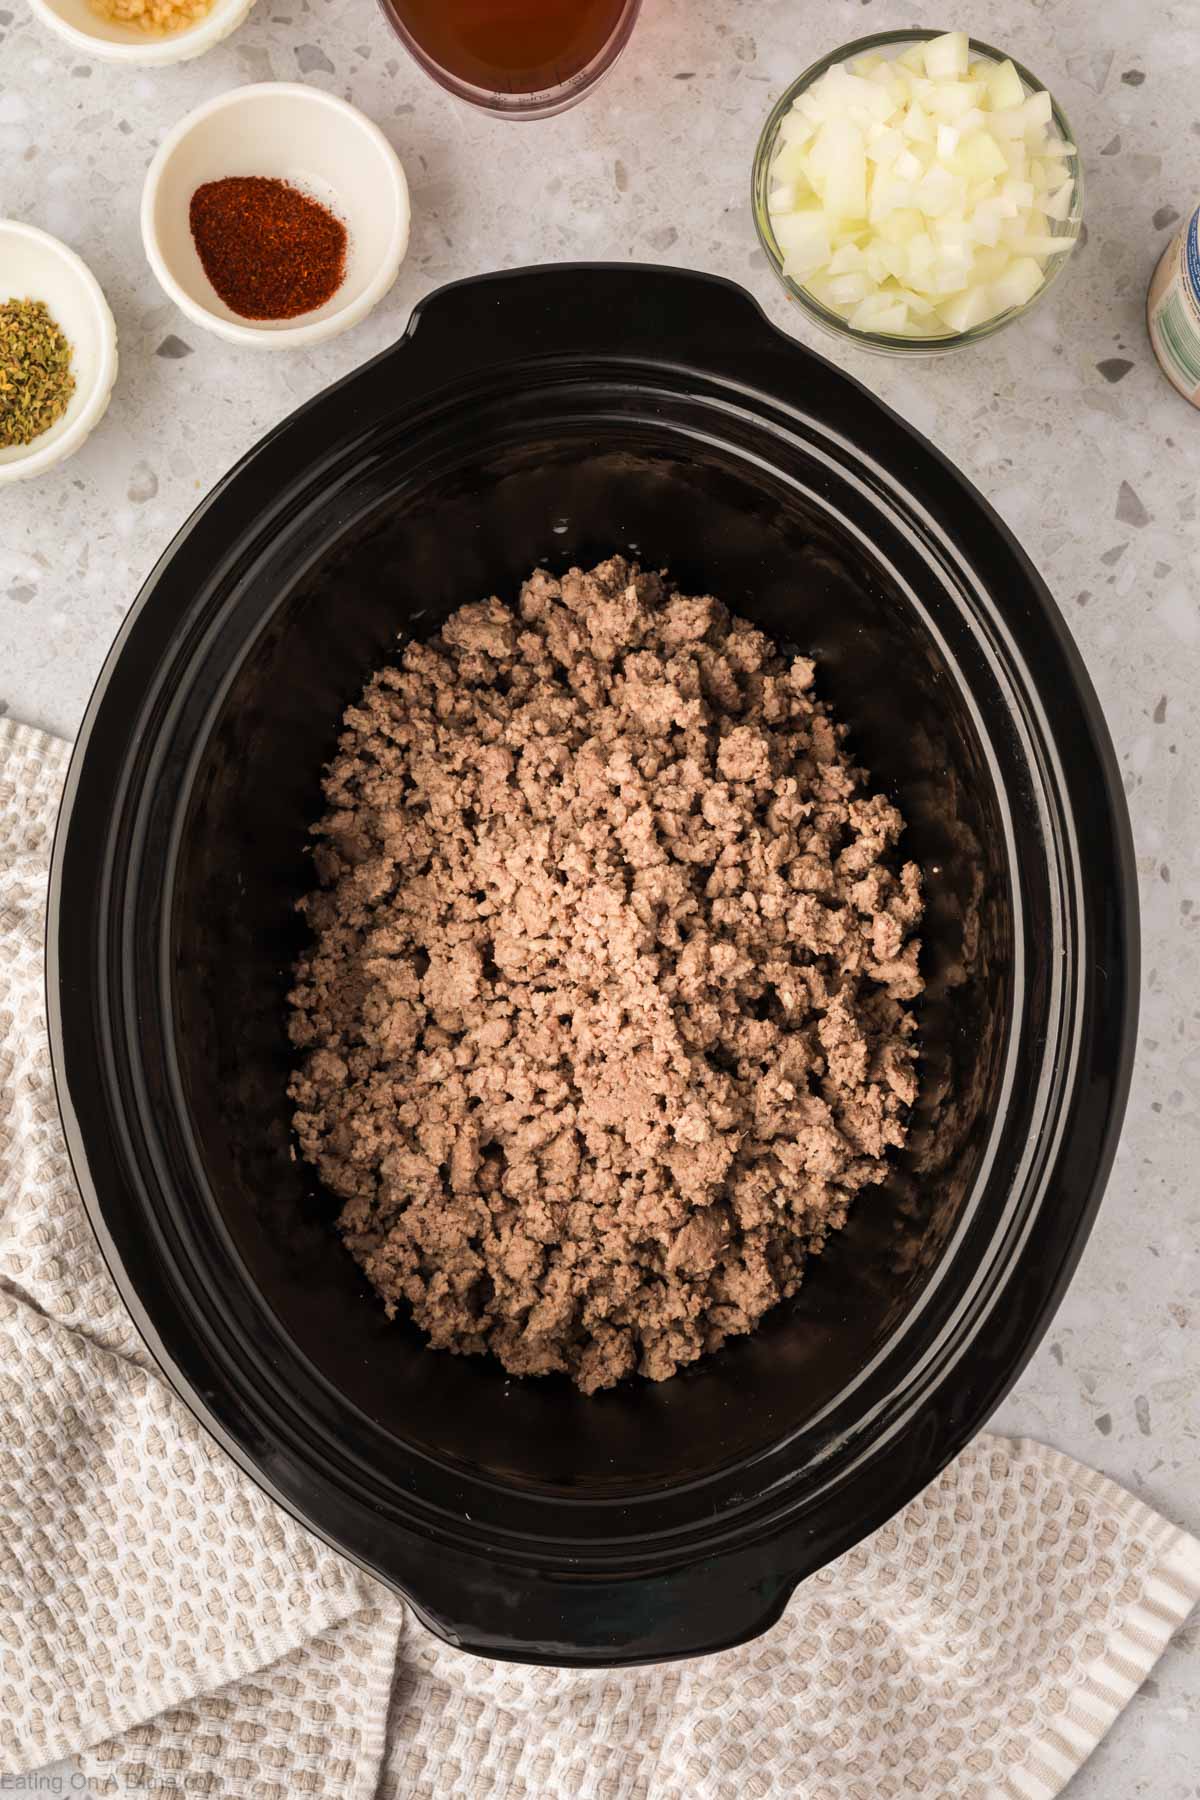 Placing the ground beef in the slow cooker